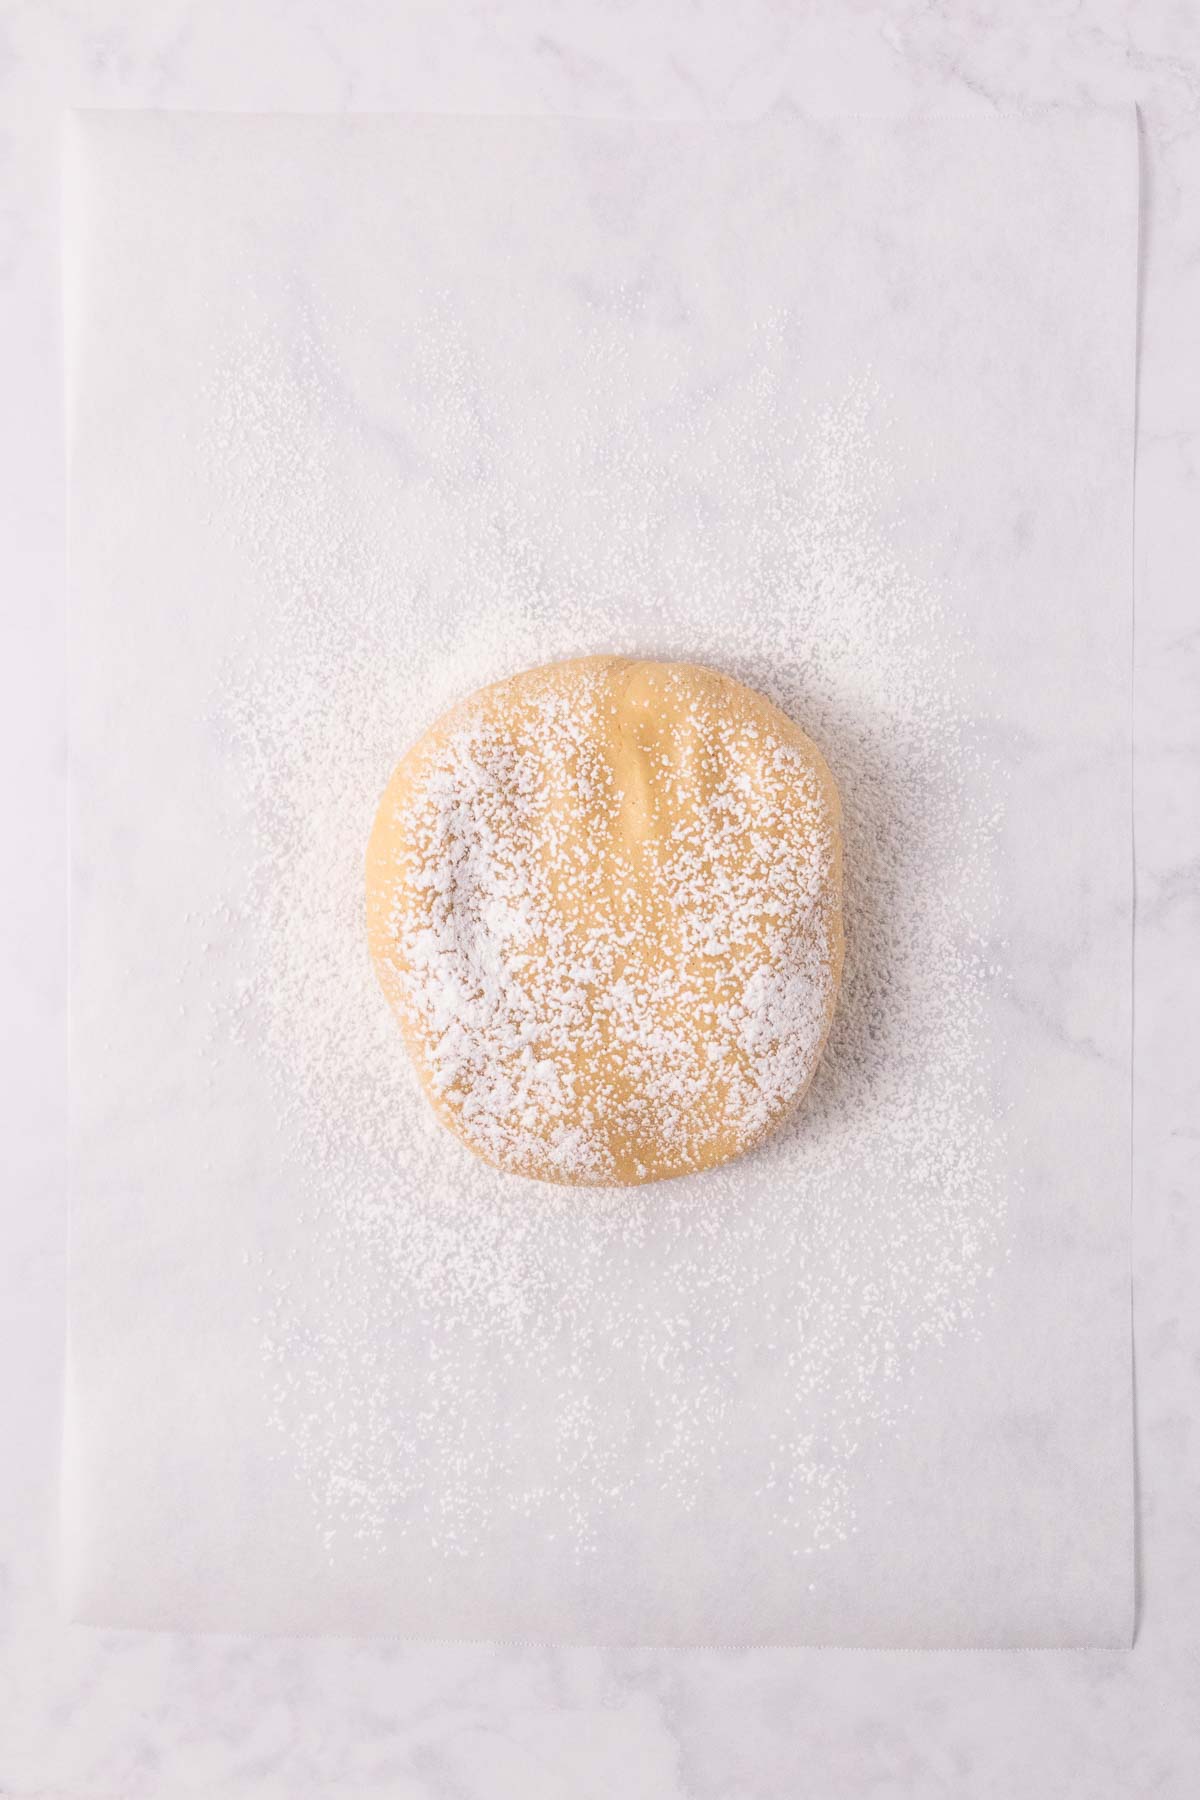 The ball of dough, dusted with flour, on a flour dusted sheet of baking paper.